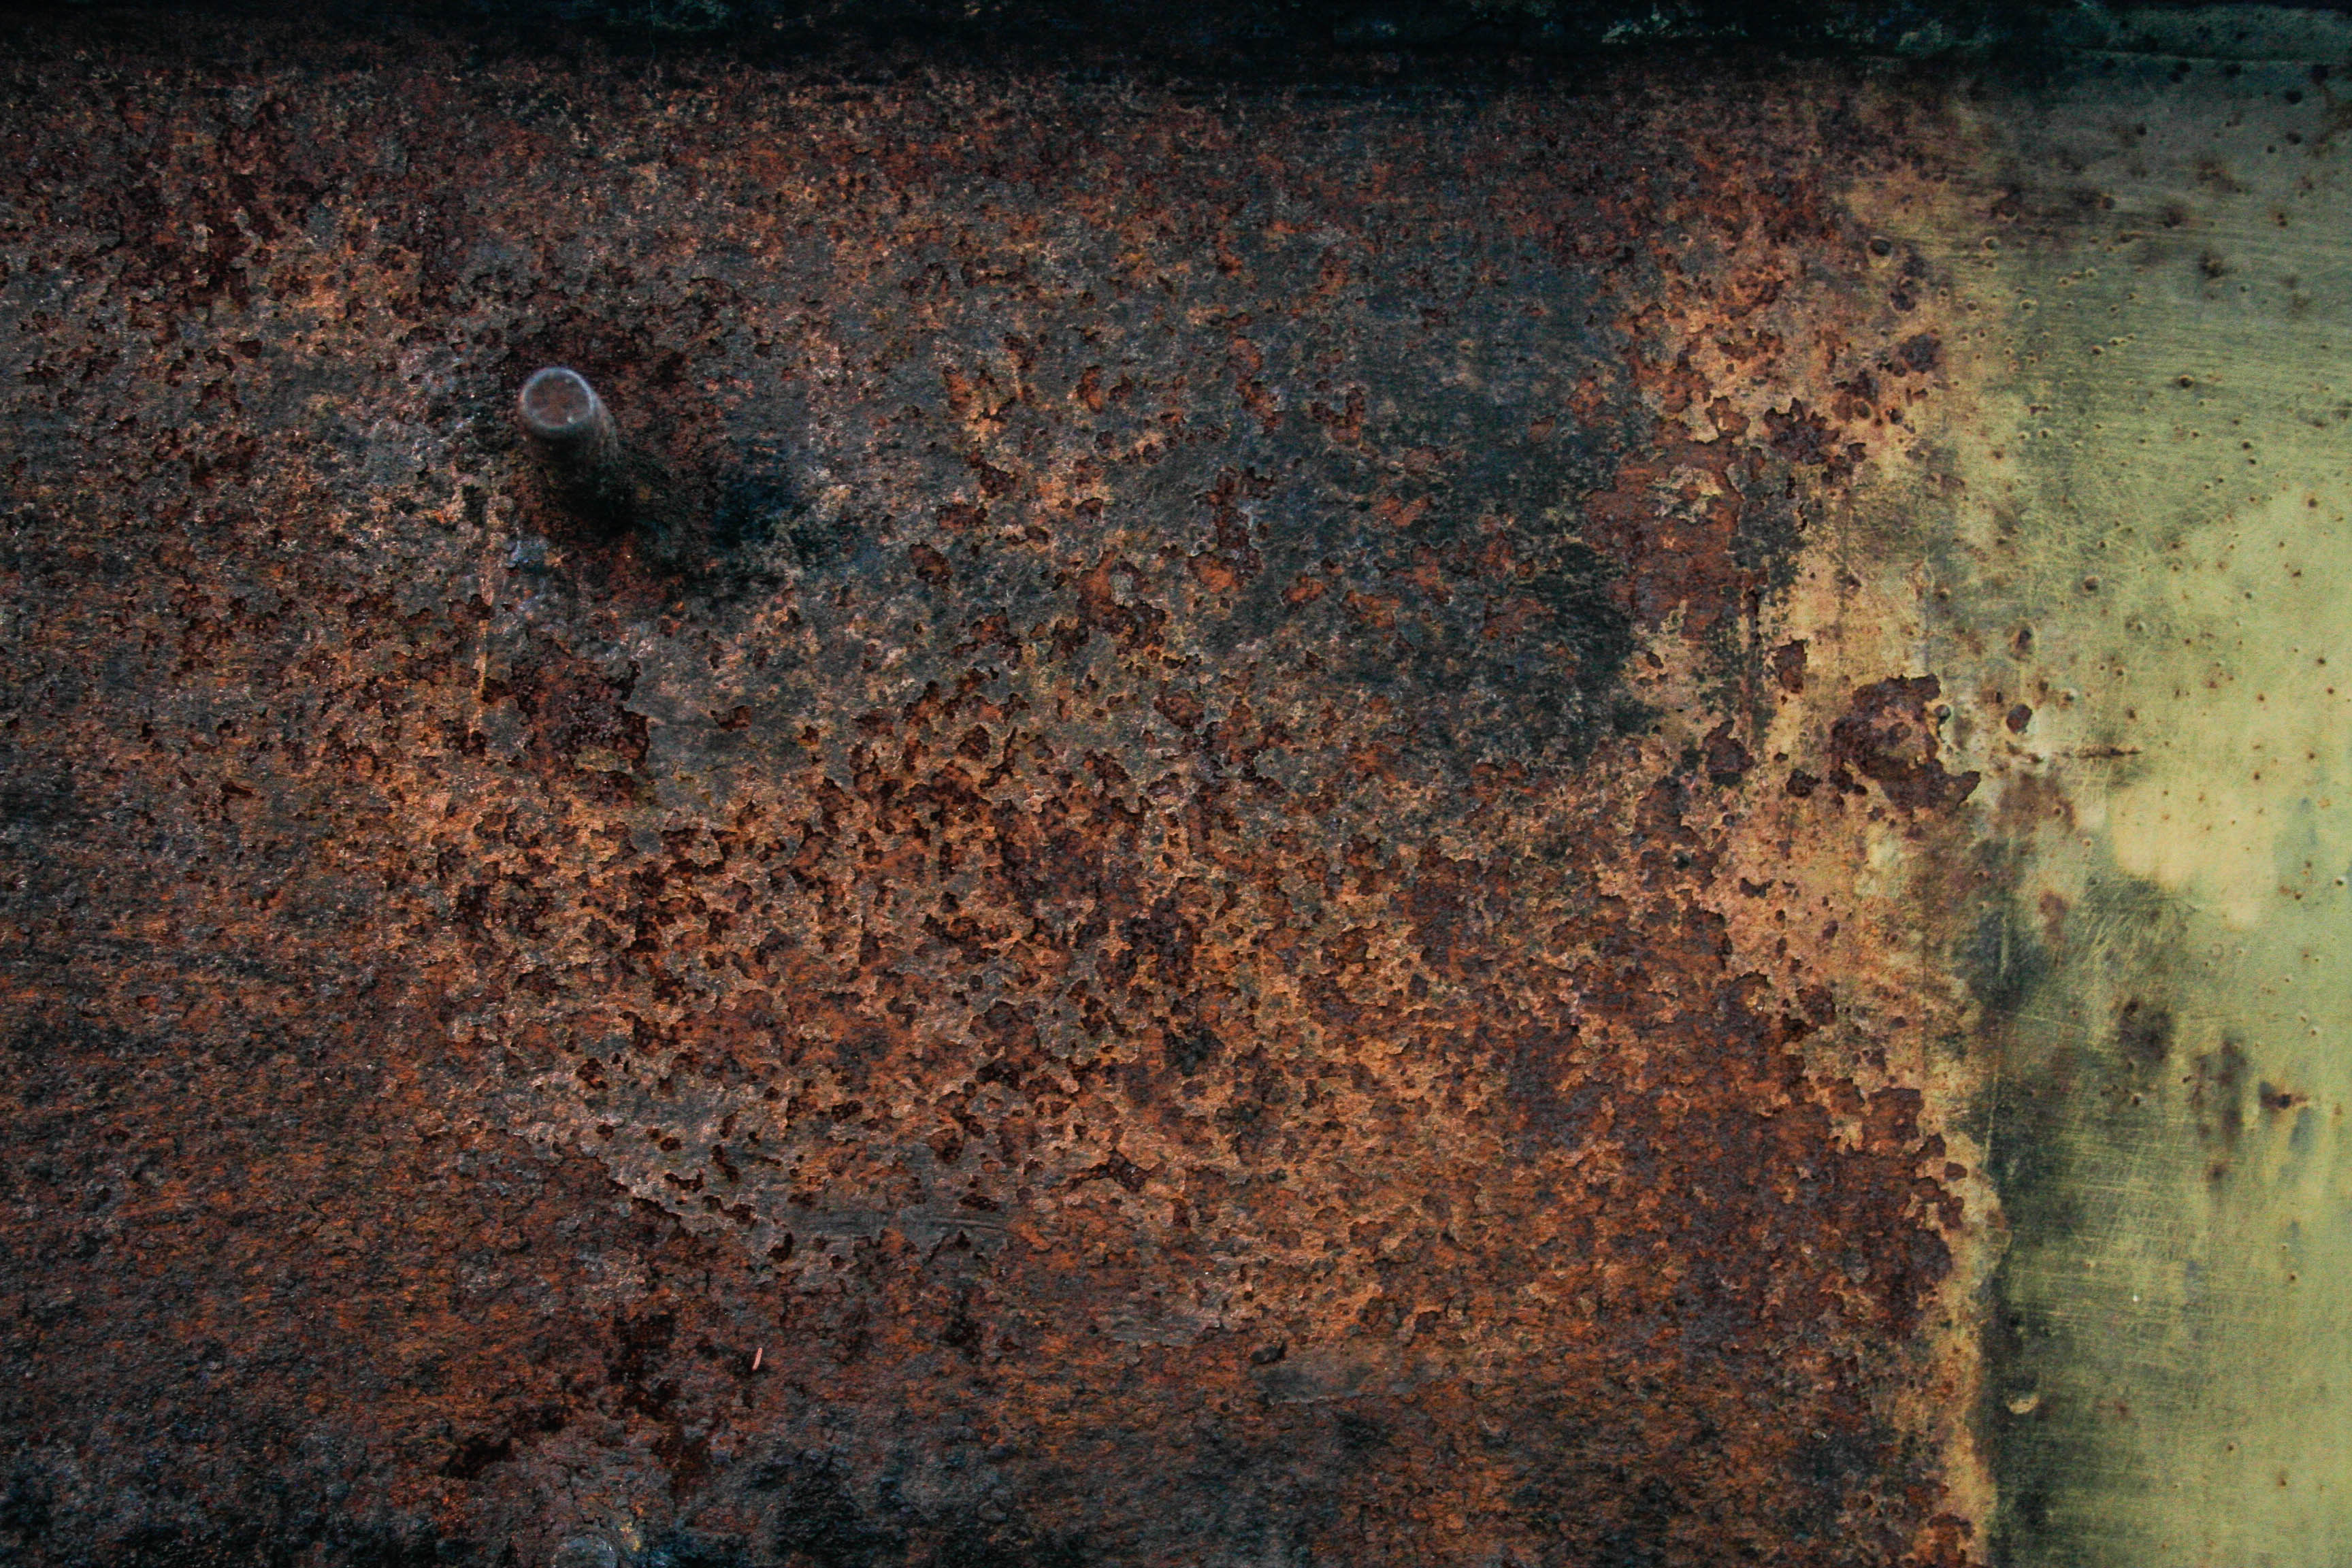 9 Cool Rusty Painted Metal Texture